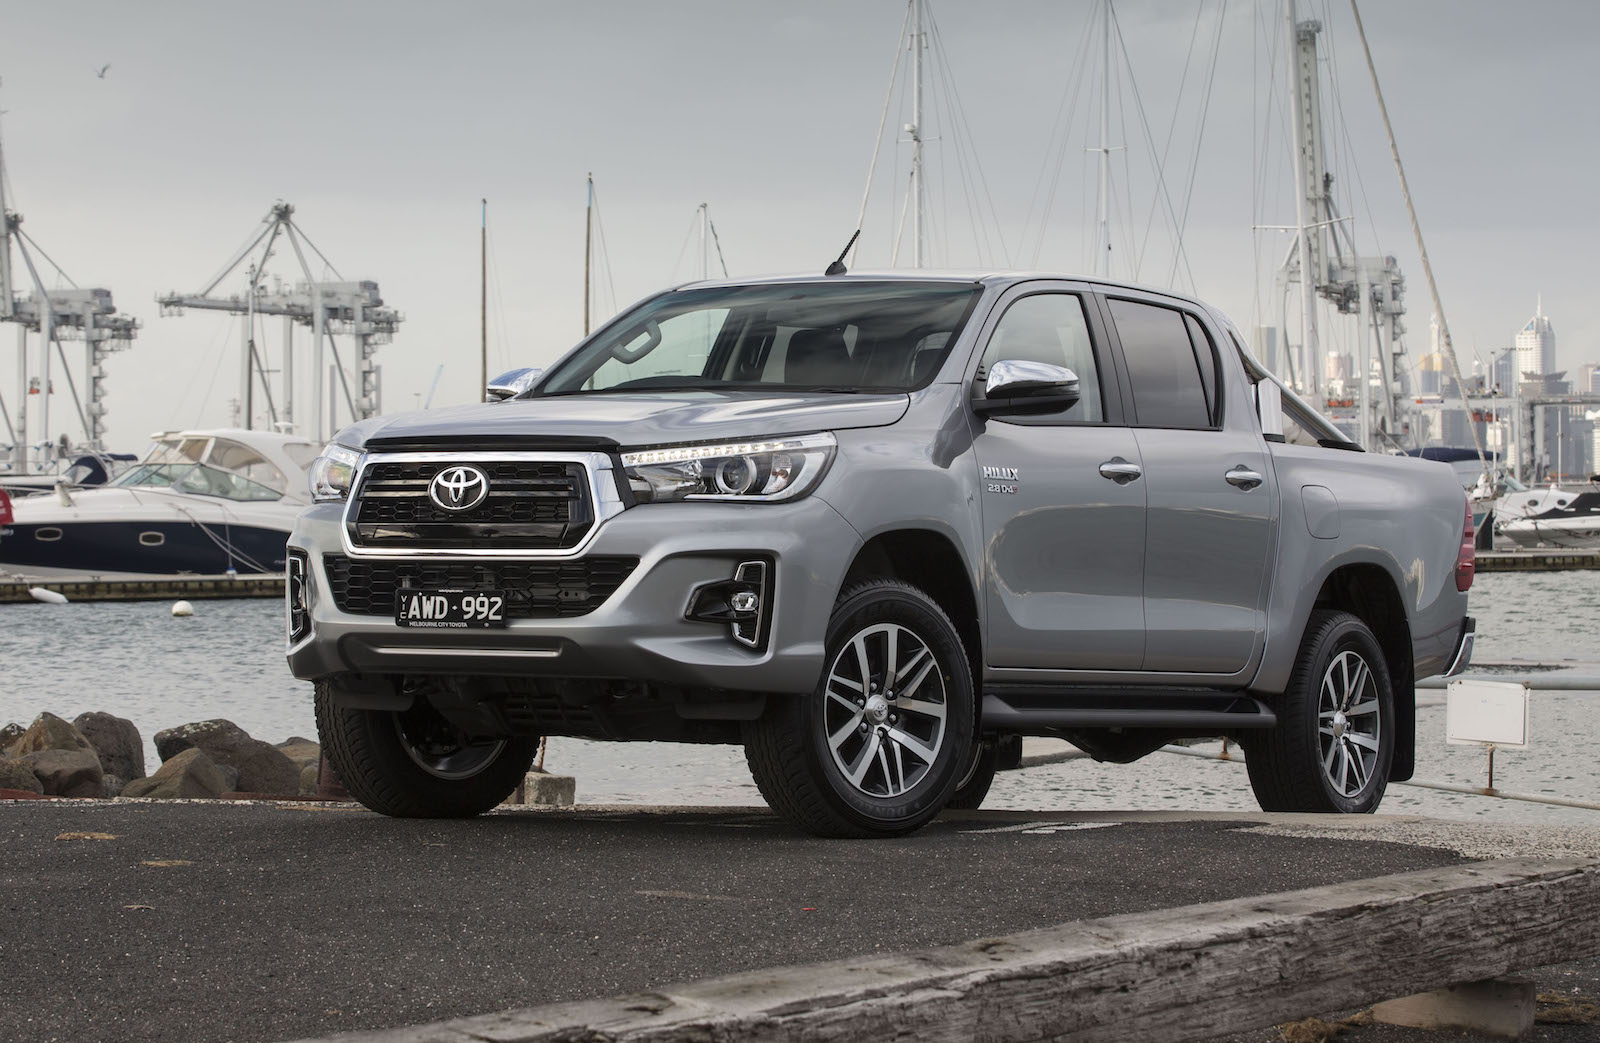 2019 Toyota HiLux officially announced with updated look